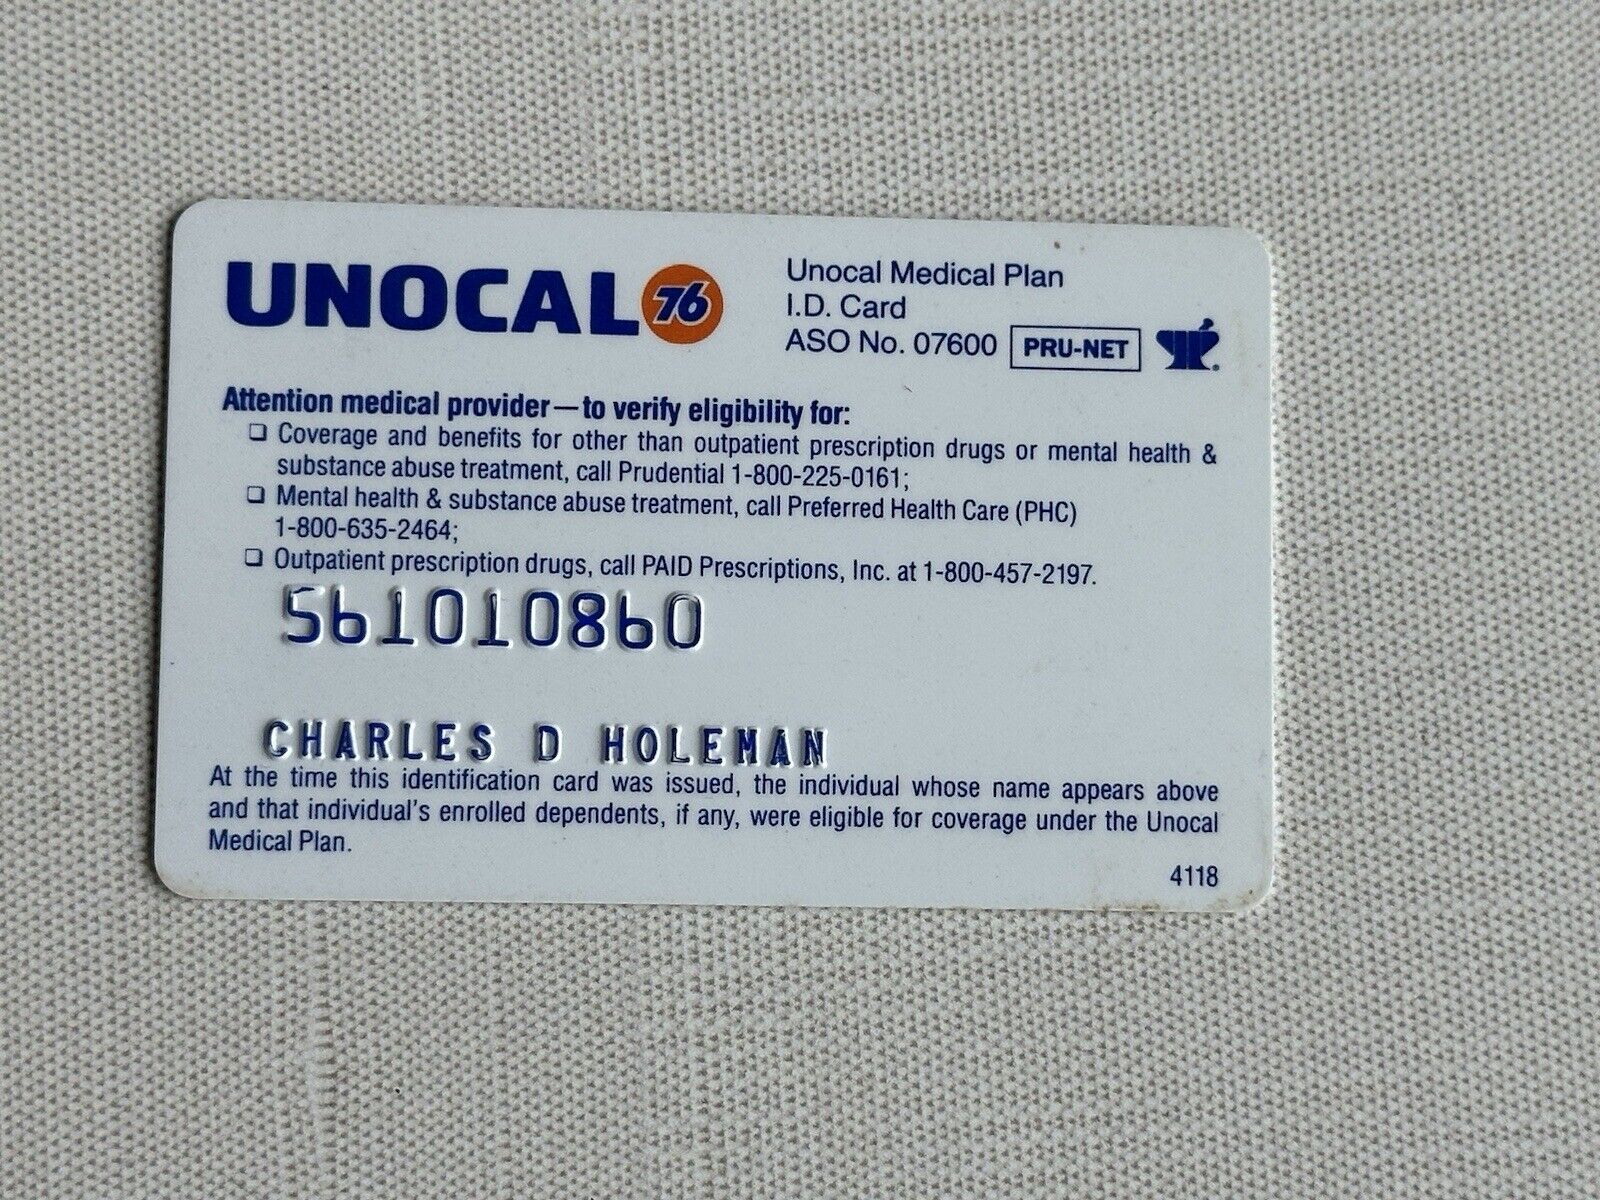 UNOCAL MEDICAL PLAN  UNION  76 CARD EXPIRED   Vintage